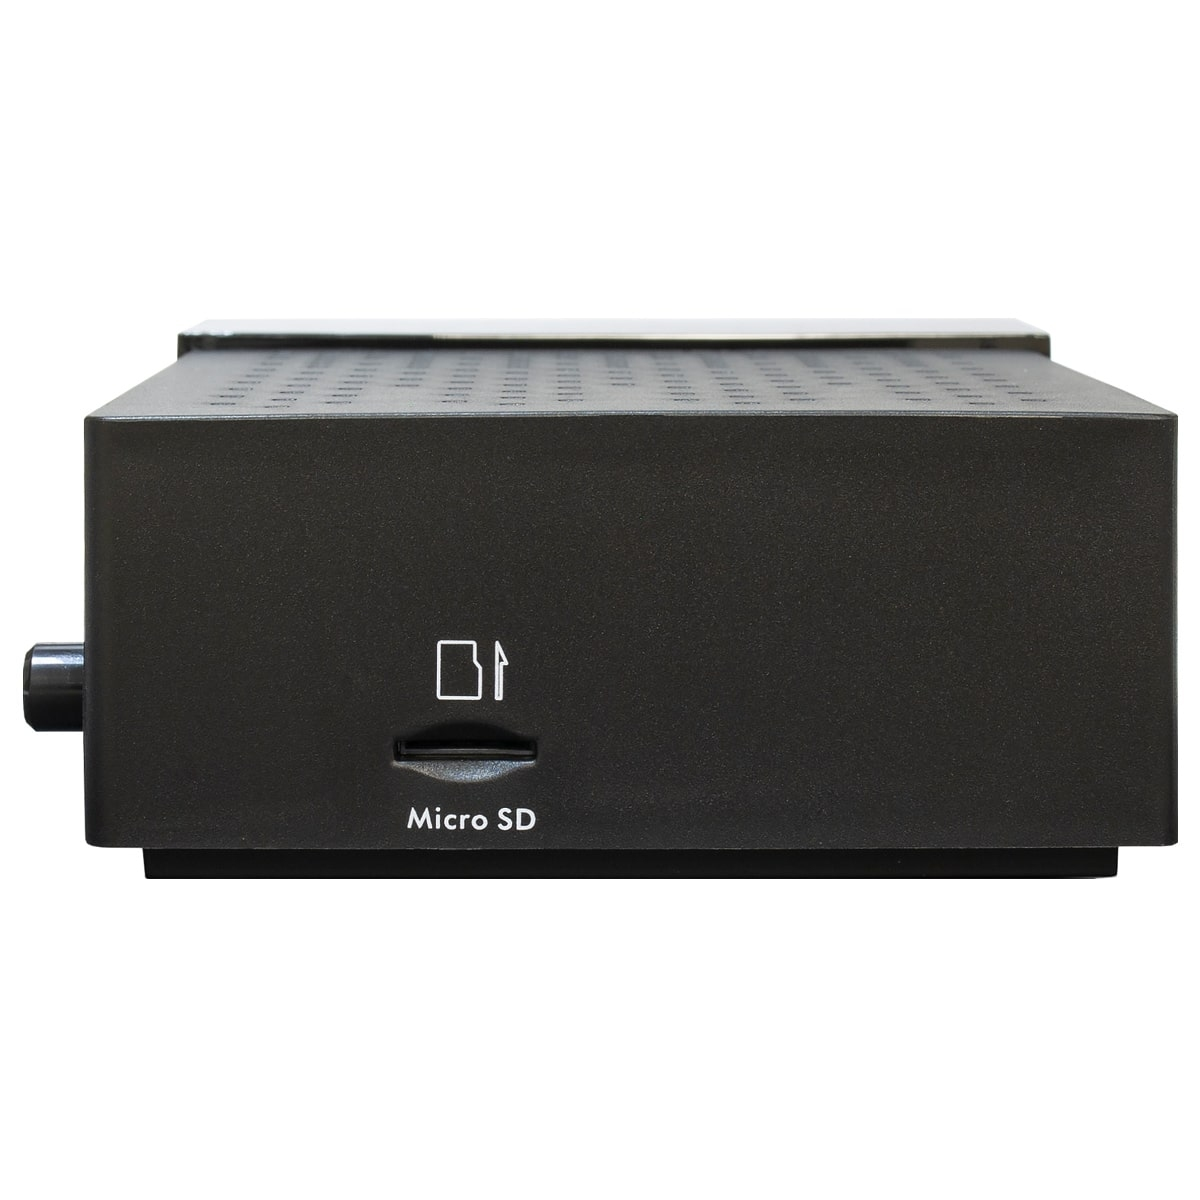 AB-COM IPBox TWO IP-Receiver PVR-Funktion=optional, Schwarz) Twin Twin Tuner, (HDTV, Receiver DVB-S2